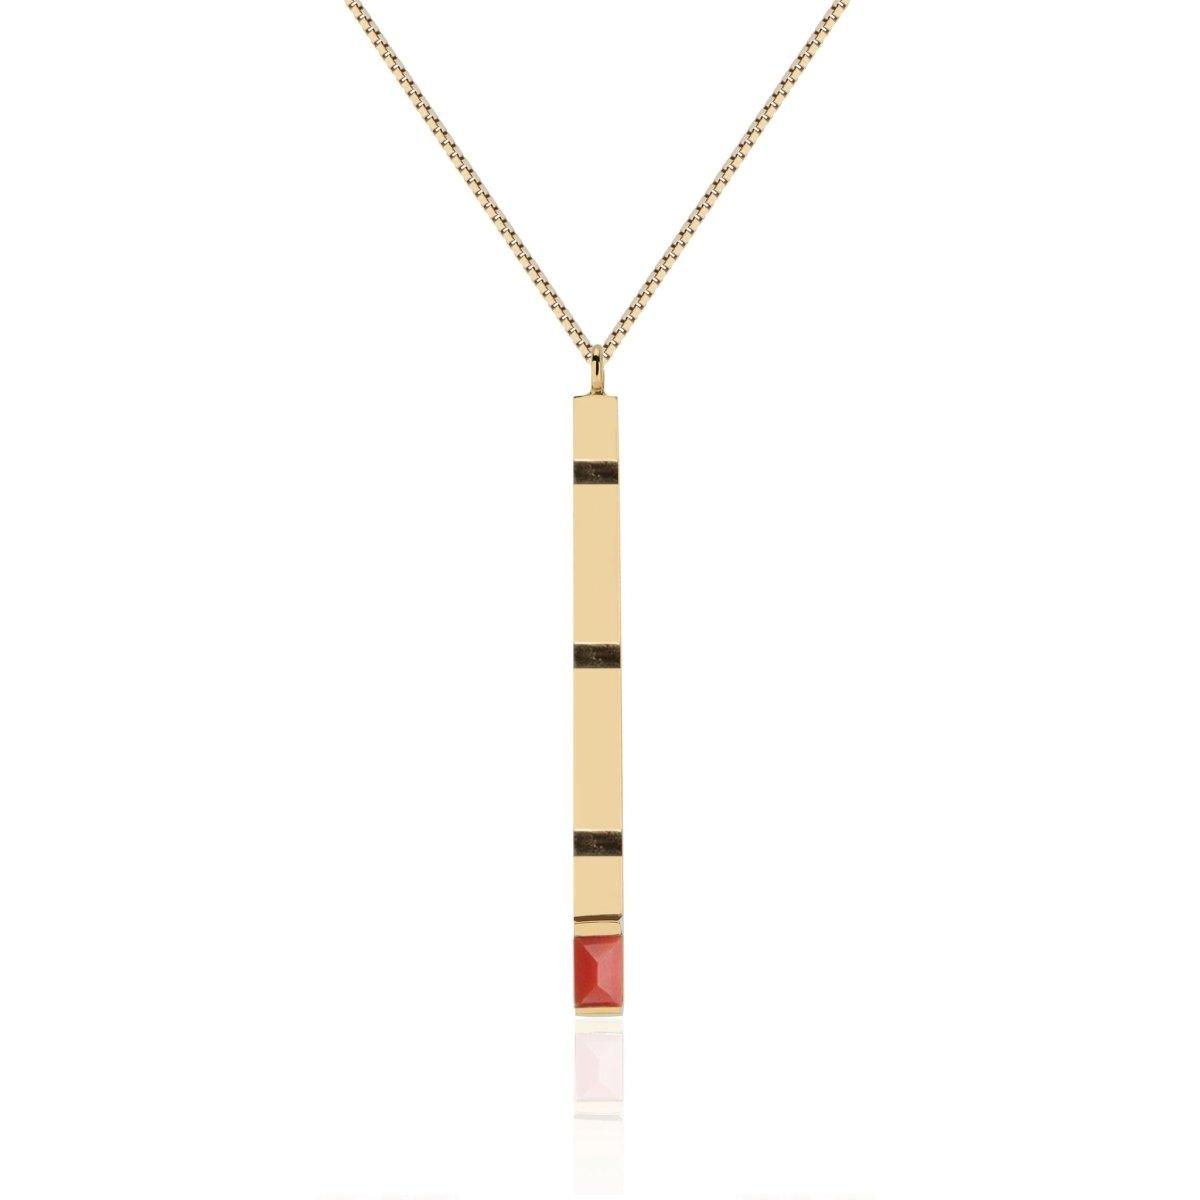 Gold Soul Fire Matchstick Pendant - Nataly Aponte